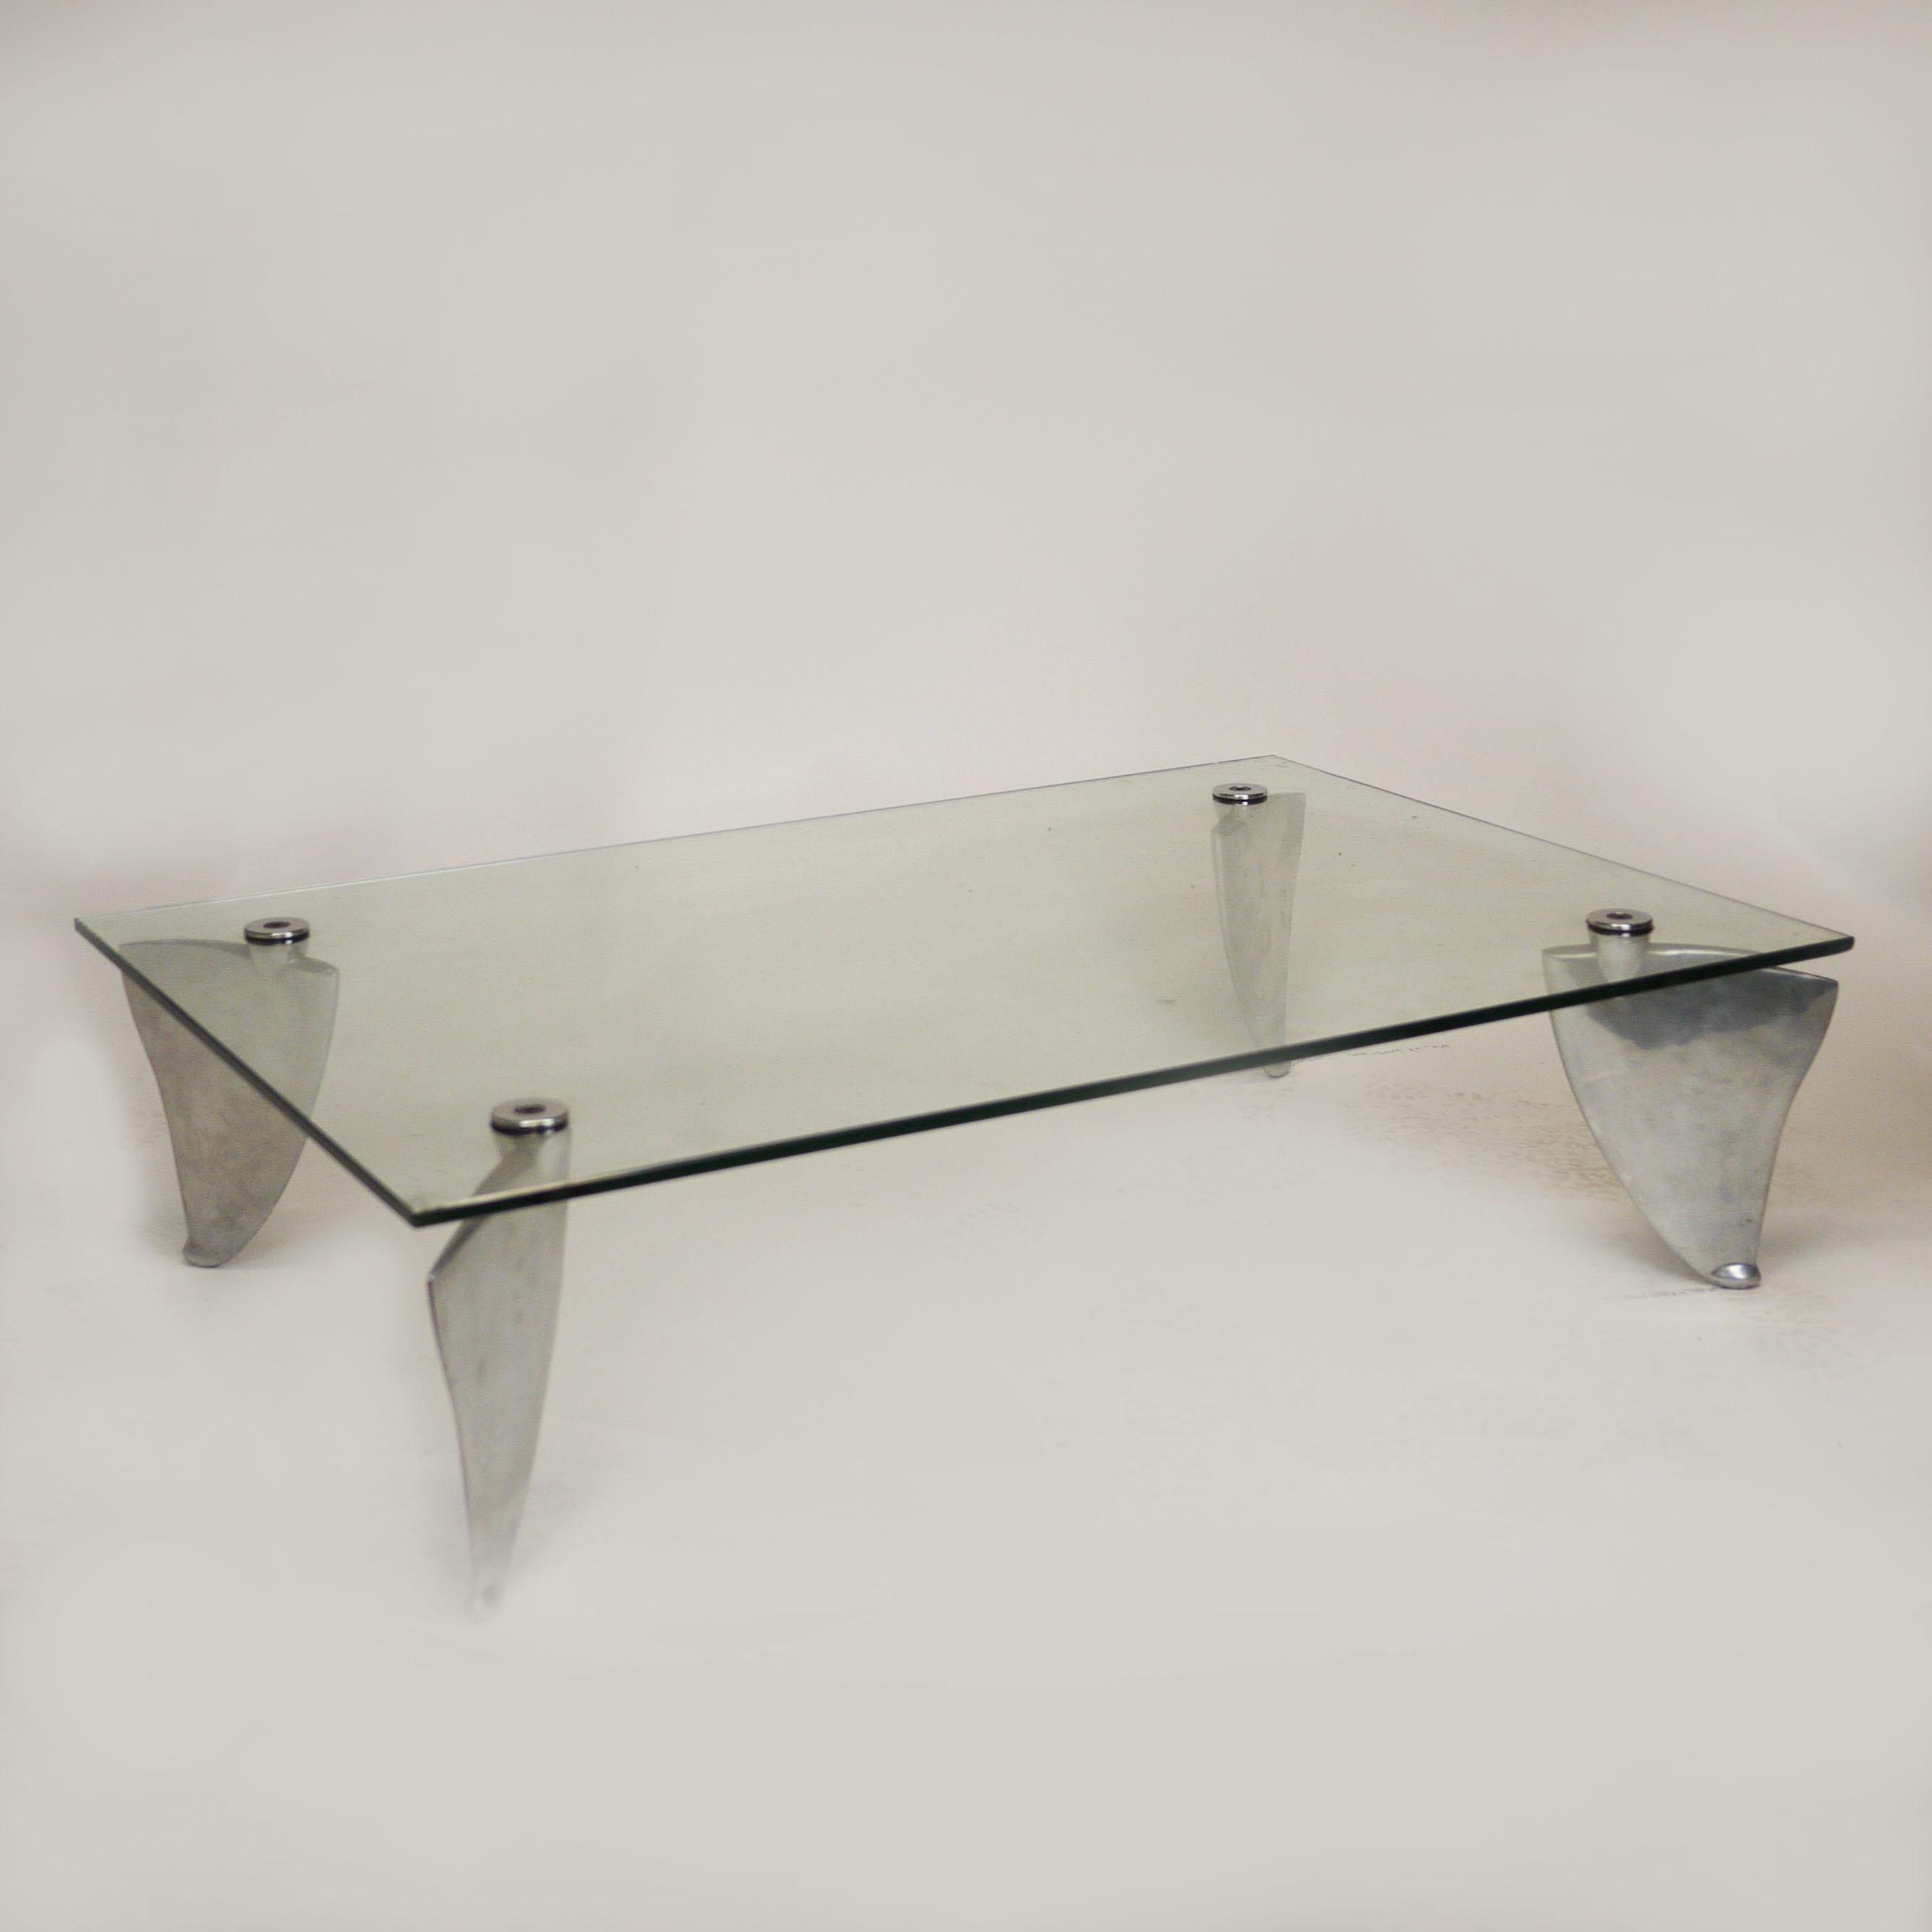 Vintage Glass and Aluminum 'Fipper' Coffee Table by Matthew Hilton for SCP, 1980 For Sale 3